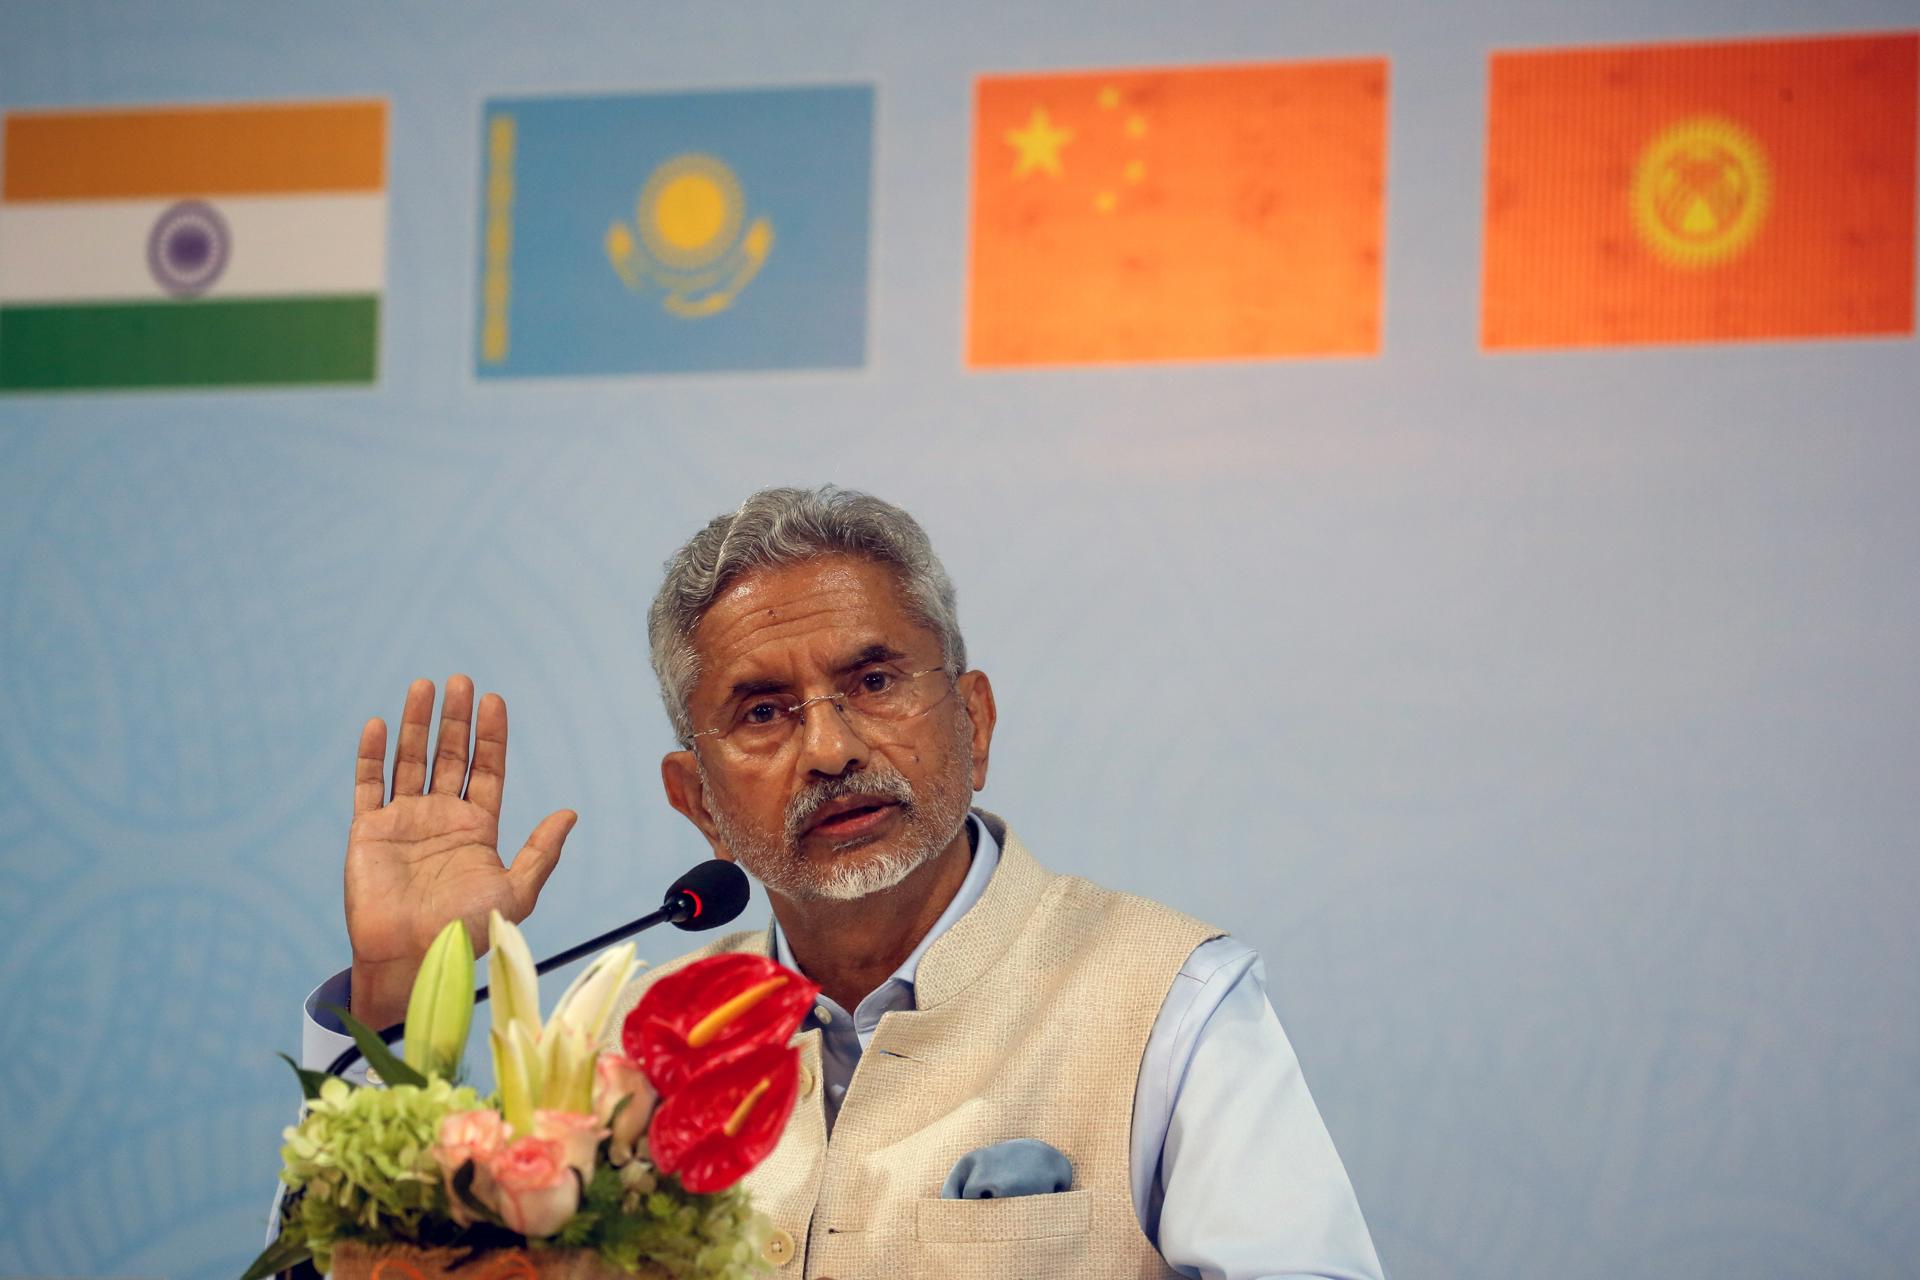 Indian External Affairs Minister S. Jaishankar speaks during a press conference after the Shanghai Cooperation Organisation Summit in Goa, India, 05 May 2023. EFE/EPA/FILE/DIVYAKANT SOLANKI